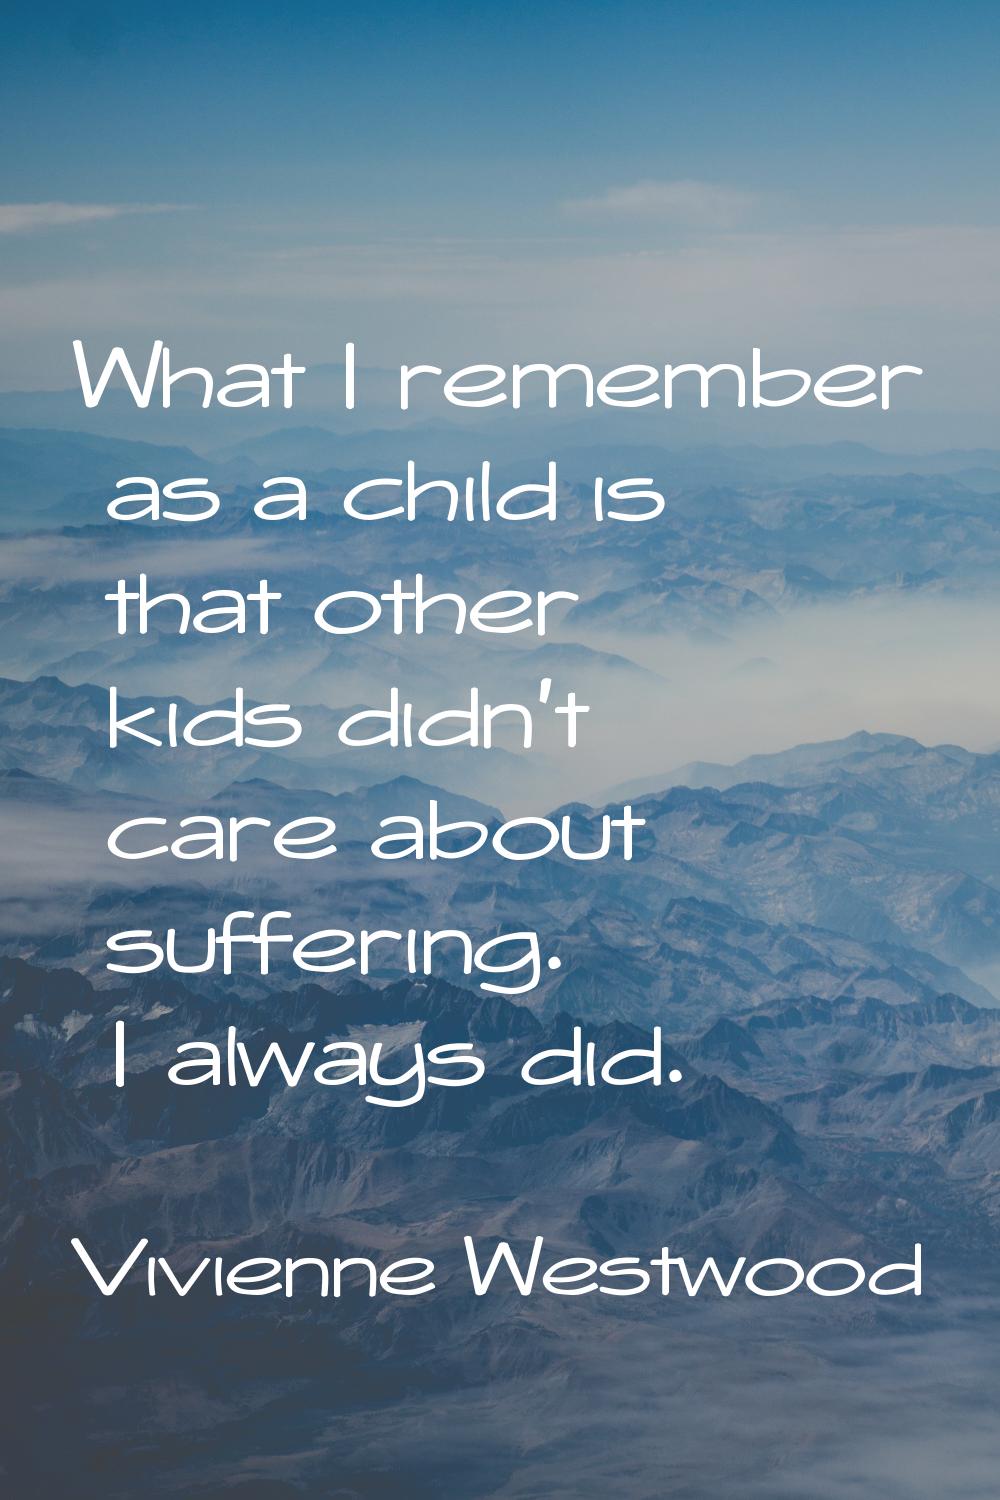 What I remember as a child is that other kids didn't care about suffering. I always did.